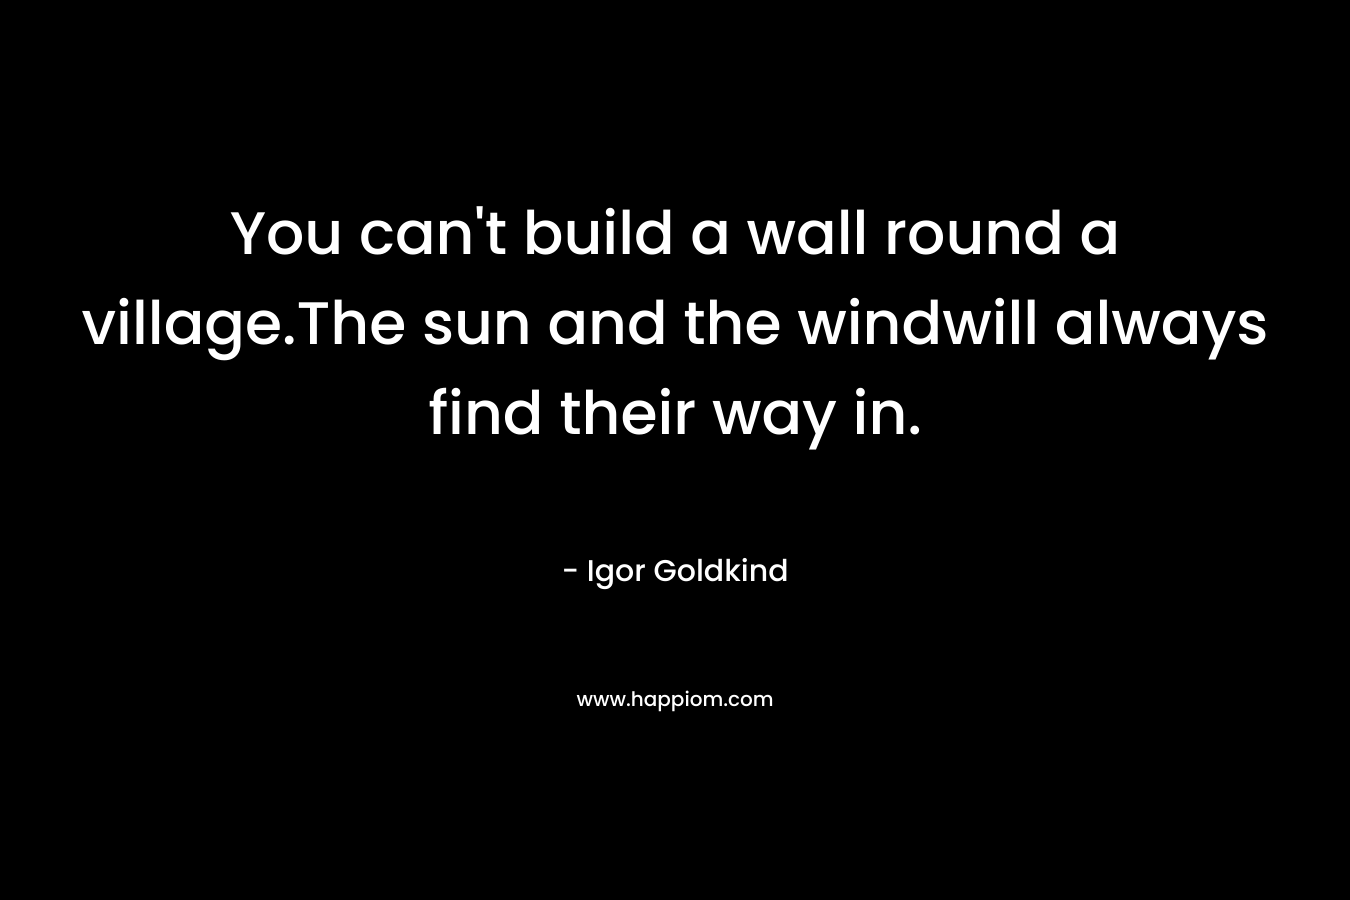 You can't build a wall round a village.The sun and the windwill always find their way in.